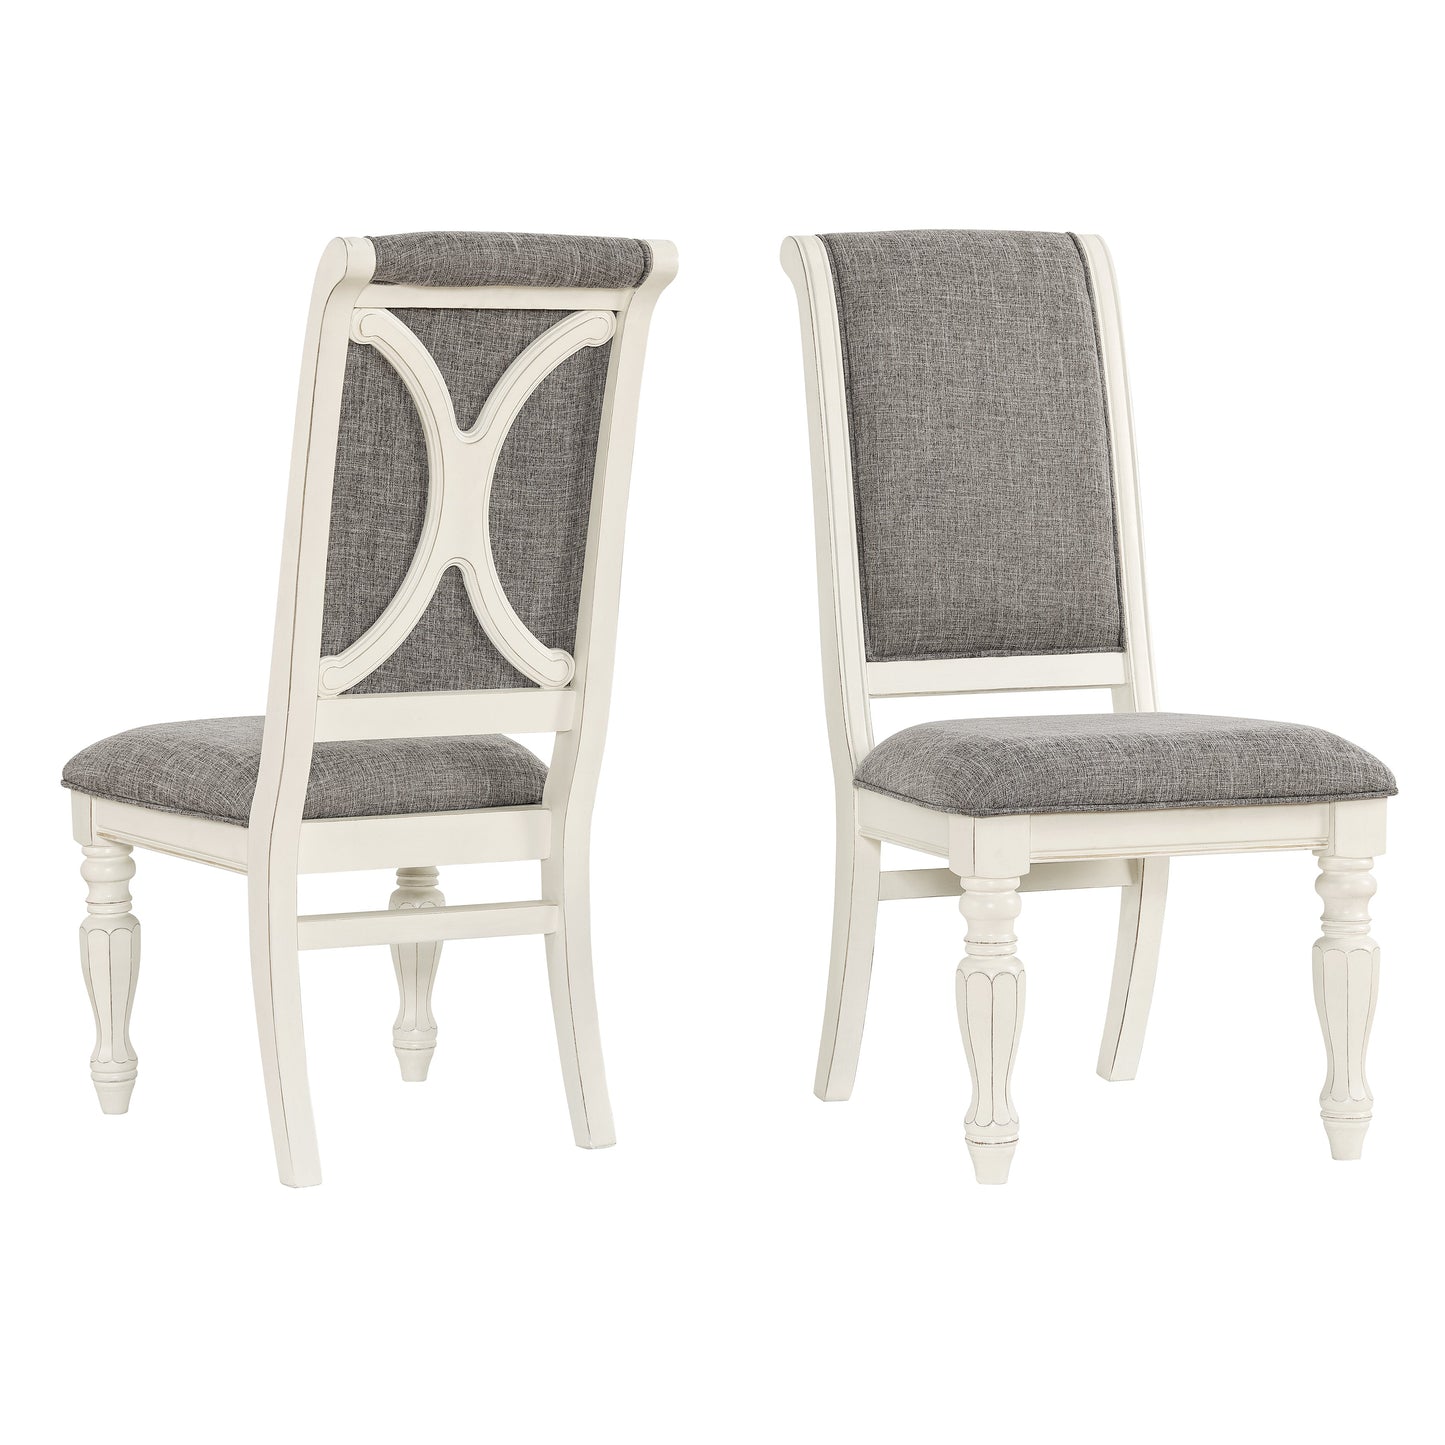 Roundhill Furniture Belleza Antique White Solid Wood Upholstered Dining Chairs, Set of 2